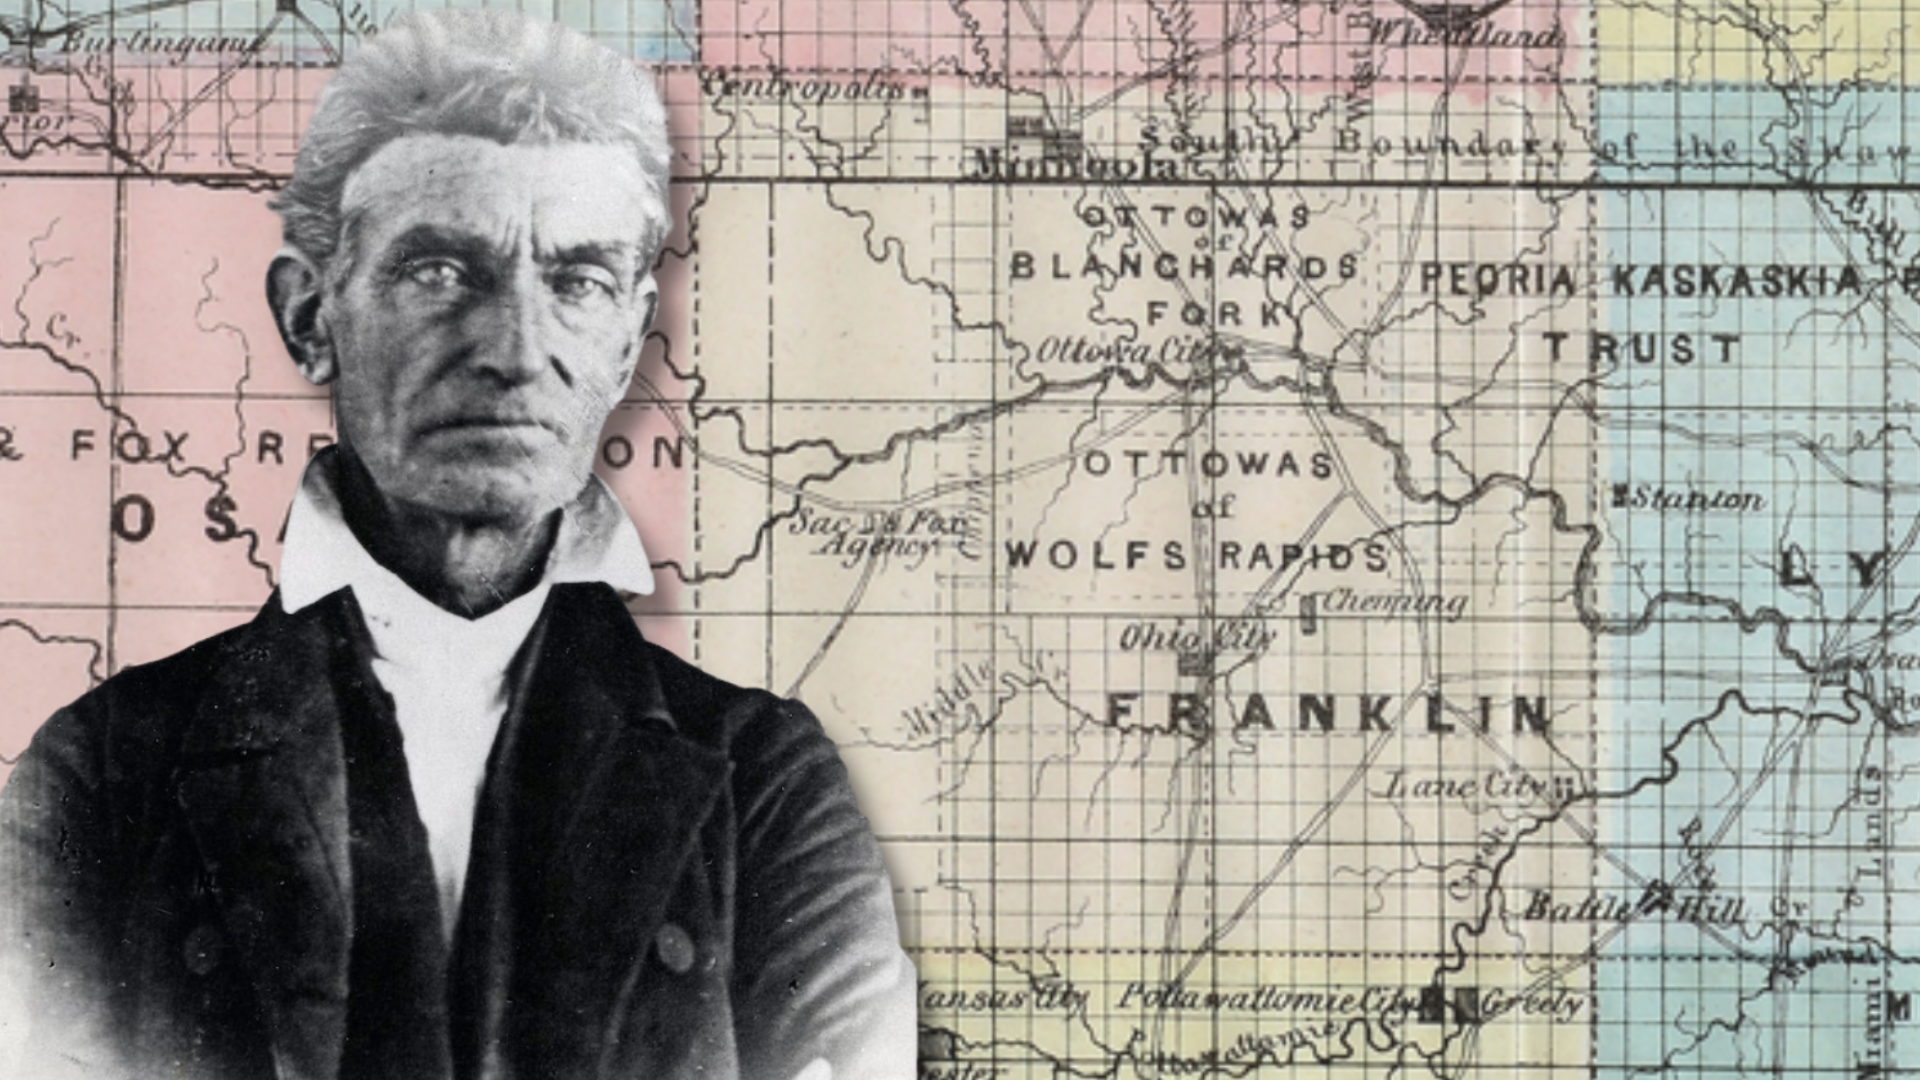 Foreground: Portrait of John Brown showing a man was graying hair, sharp facial features, a white shirt with collar, and dark jacket. Background: historic map showing Franklin County in the center.